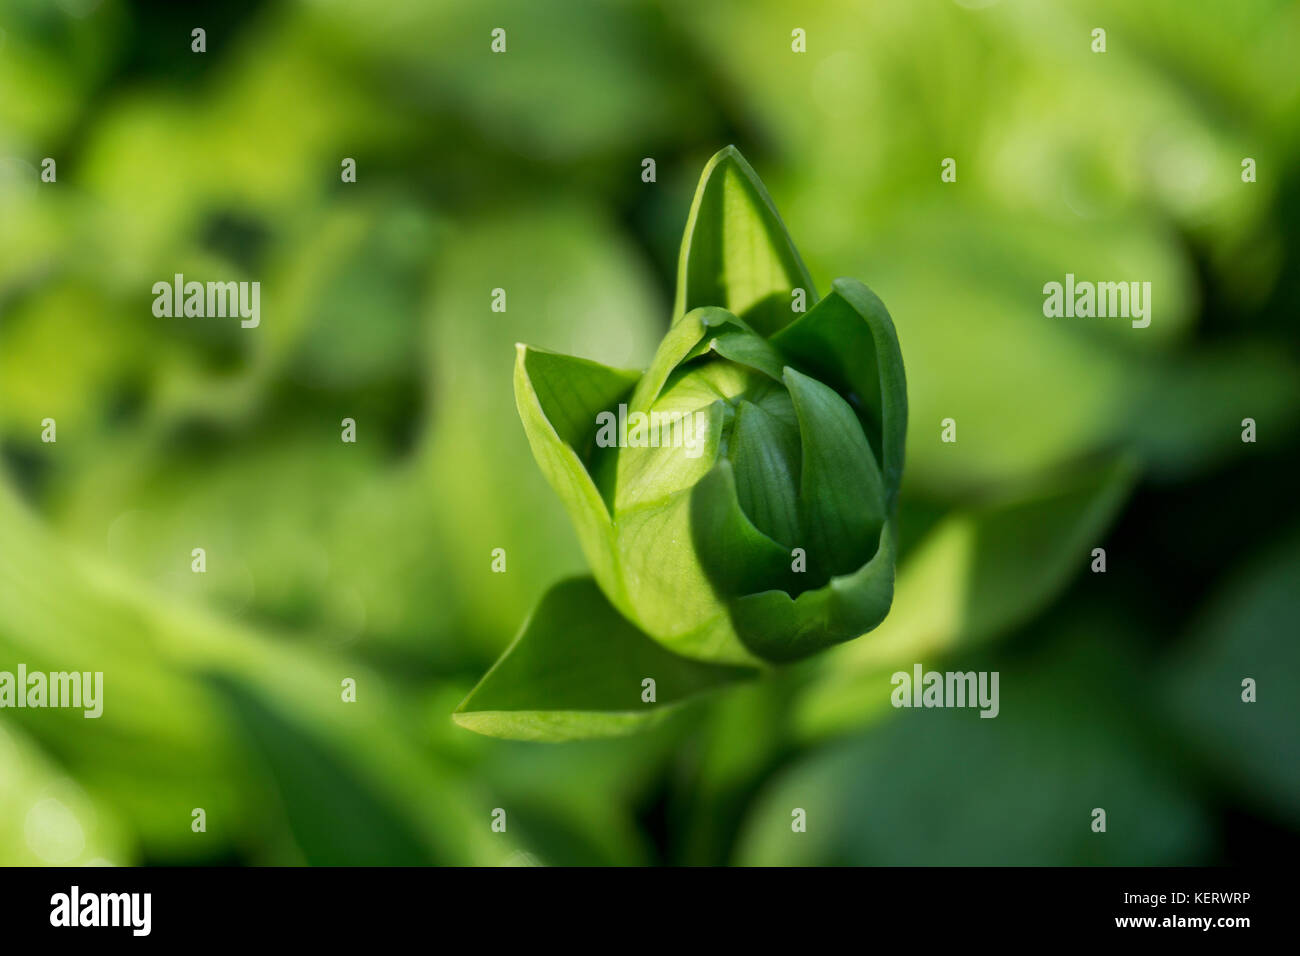 Close-up of Green Flower Bud Stock Photo